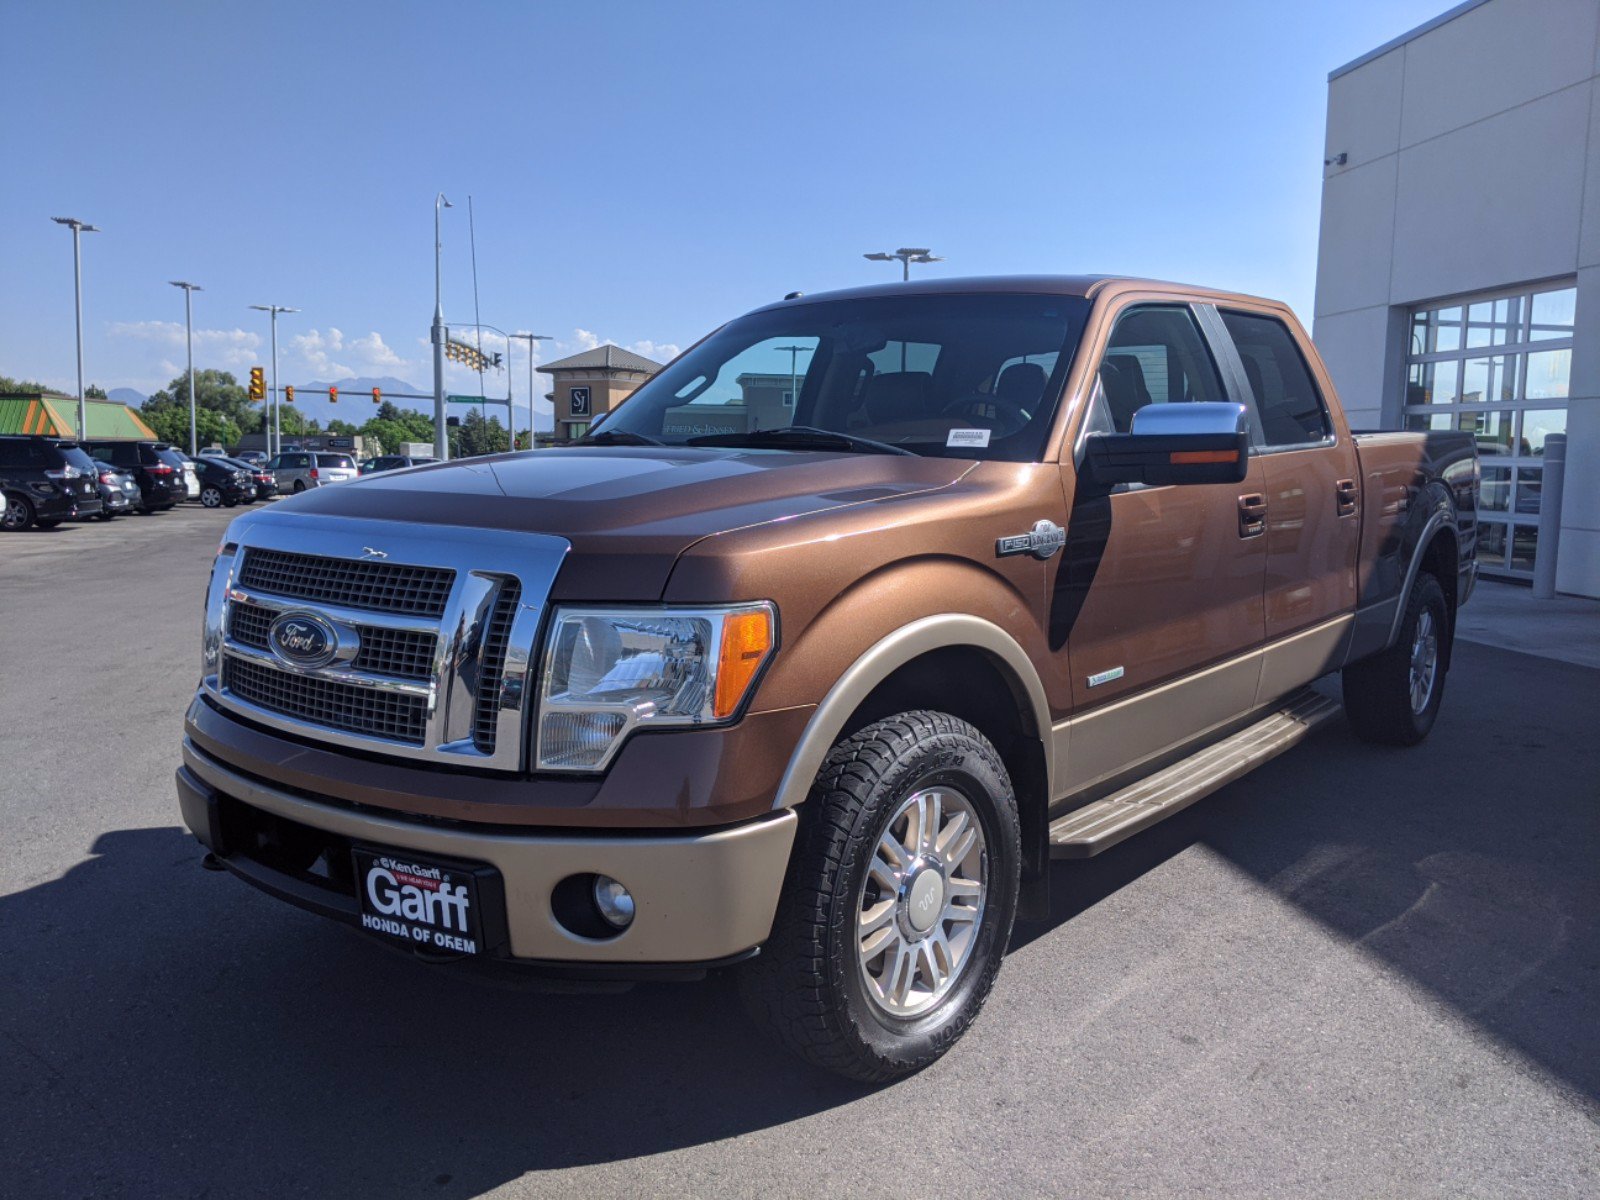 Pre-Owned 2011 Ford F-150 4WD SUPERCREW 145 KING RANCH in Orem #2HU6045